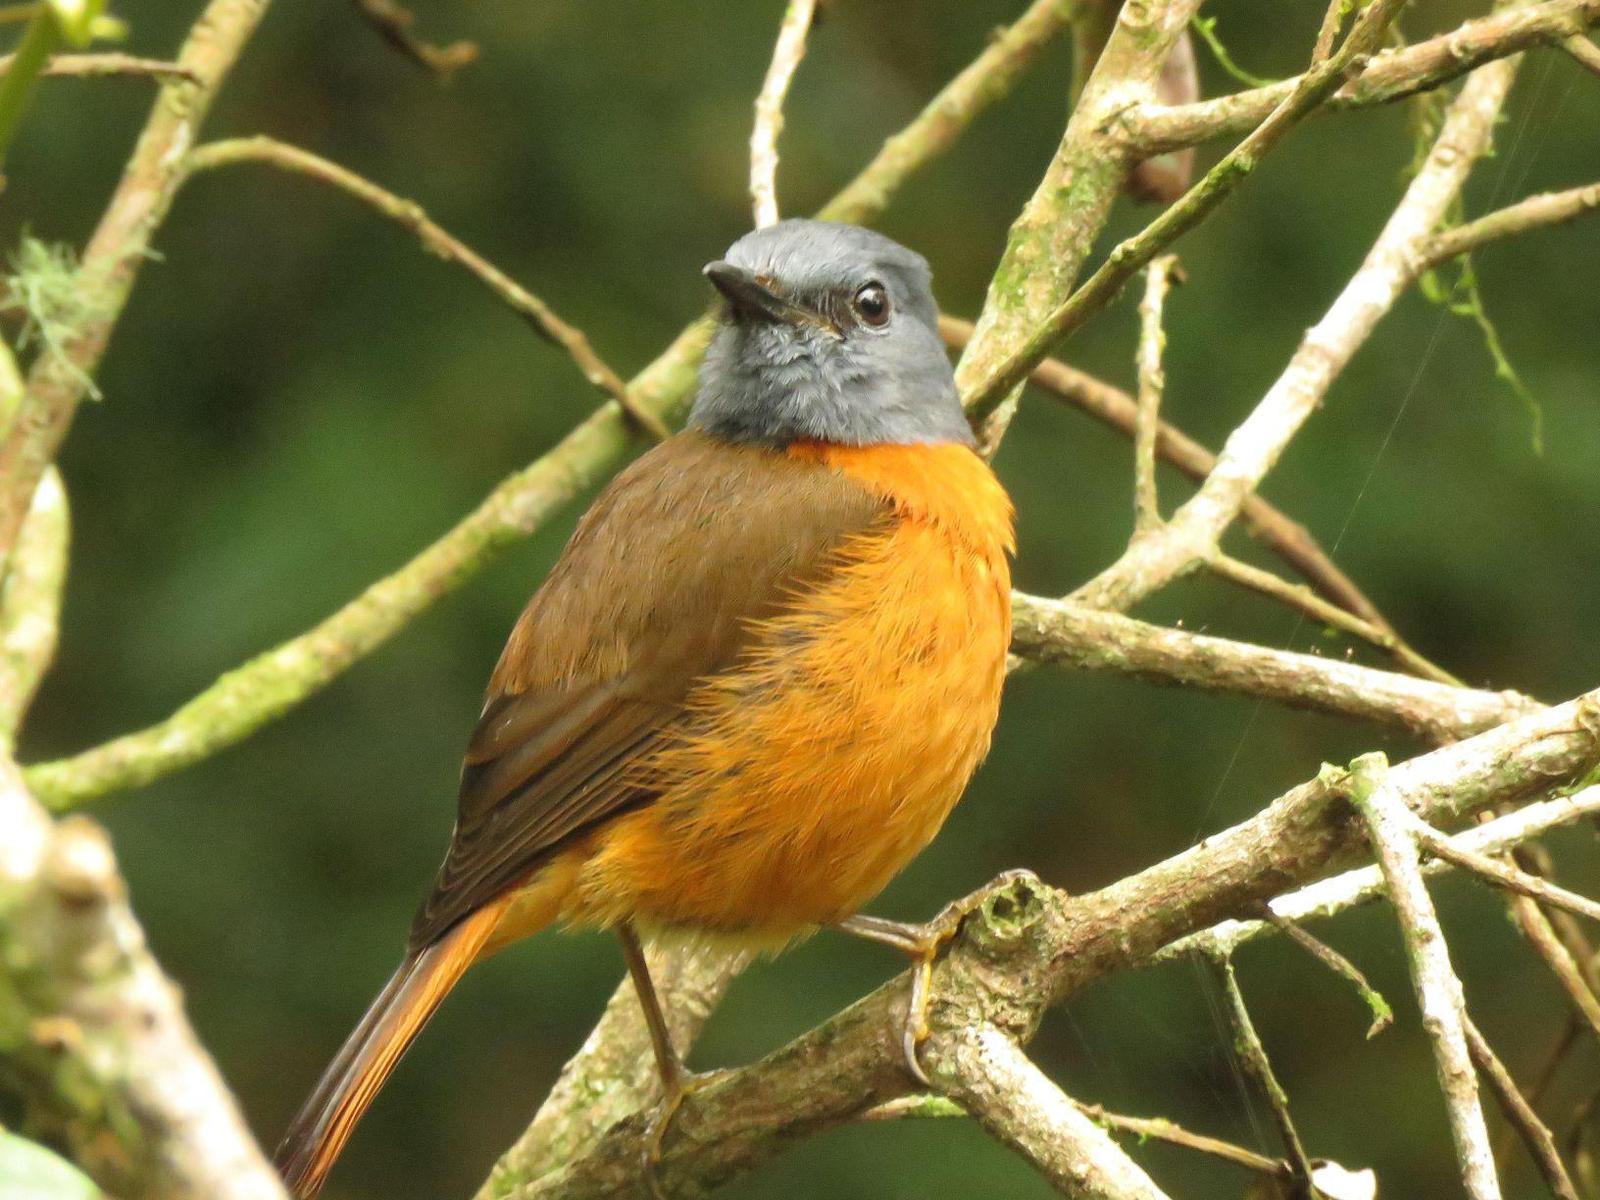 Forest Rock-Thrush Photo by Cyndee Pelt